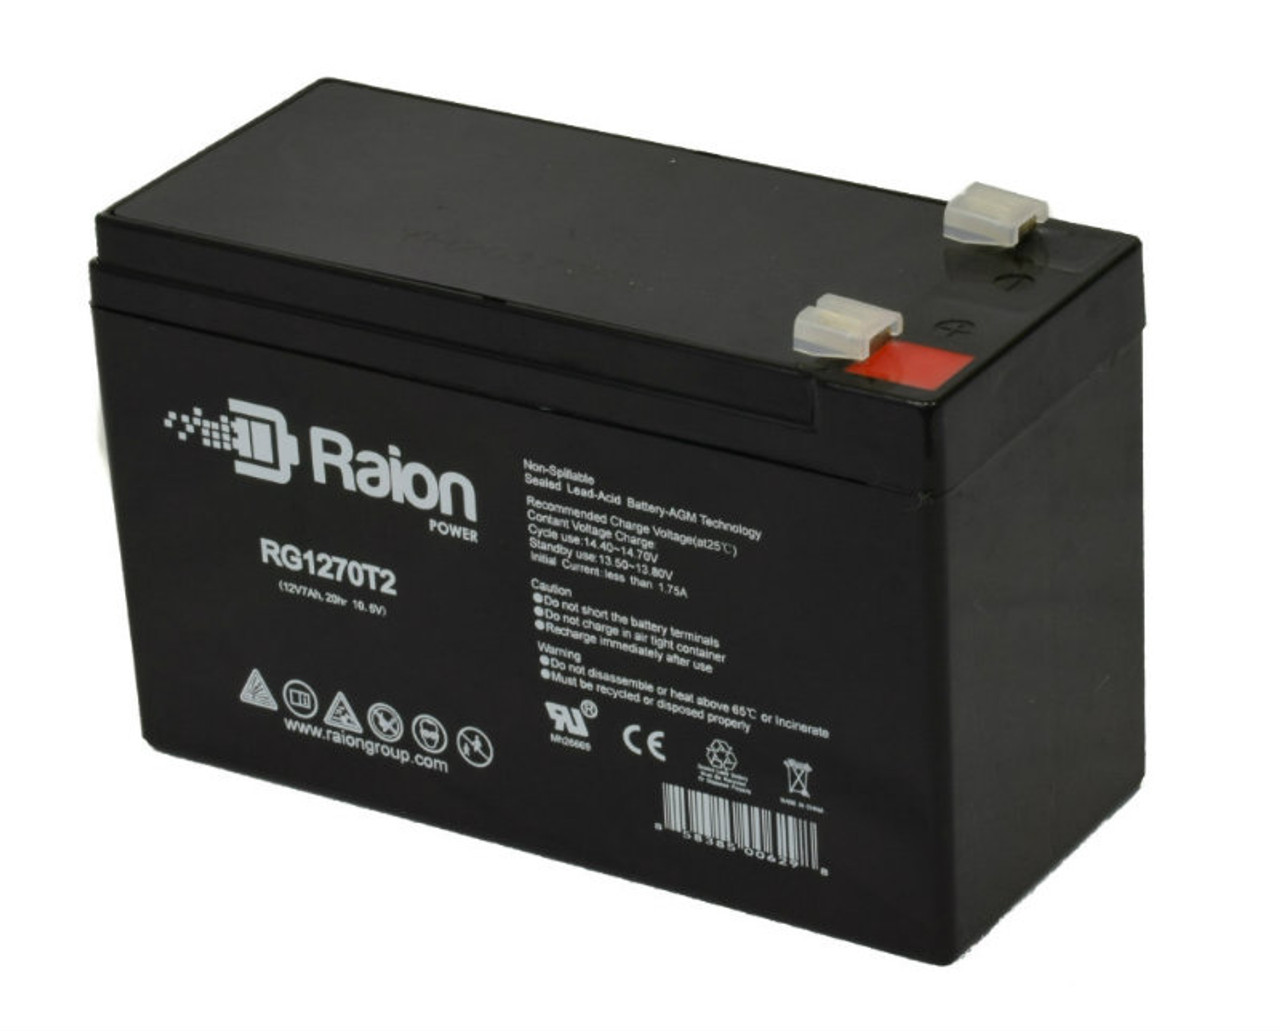 Raion Power RG1270T2 12V 7Ah Rechargeable Battery for Newmox FNC-1272-F2